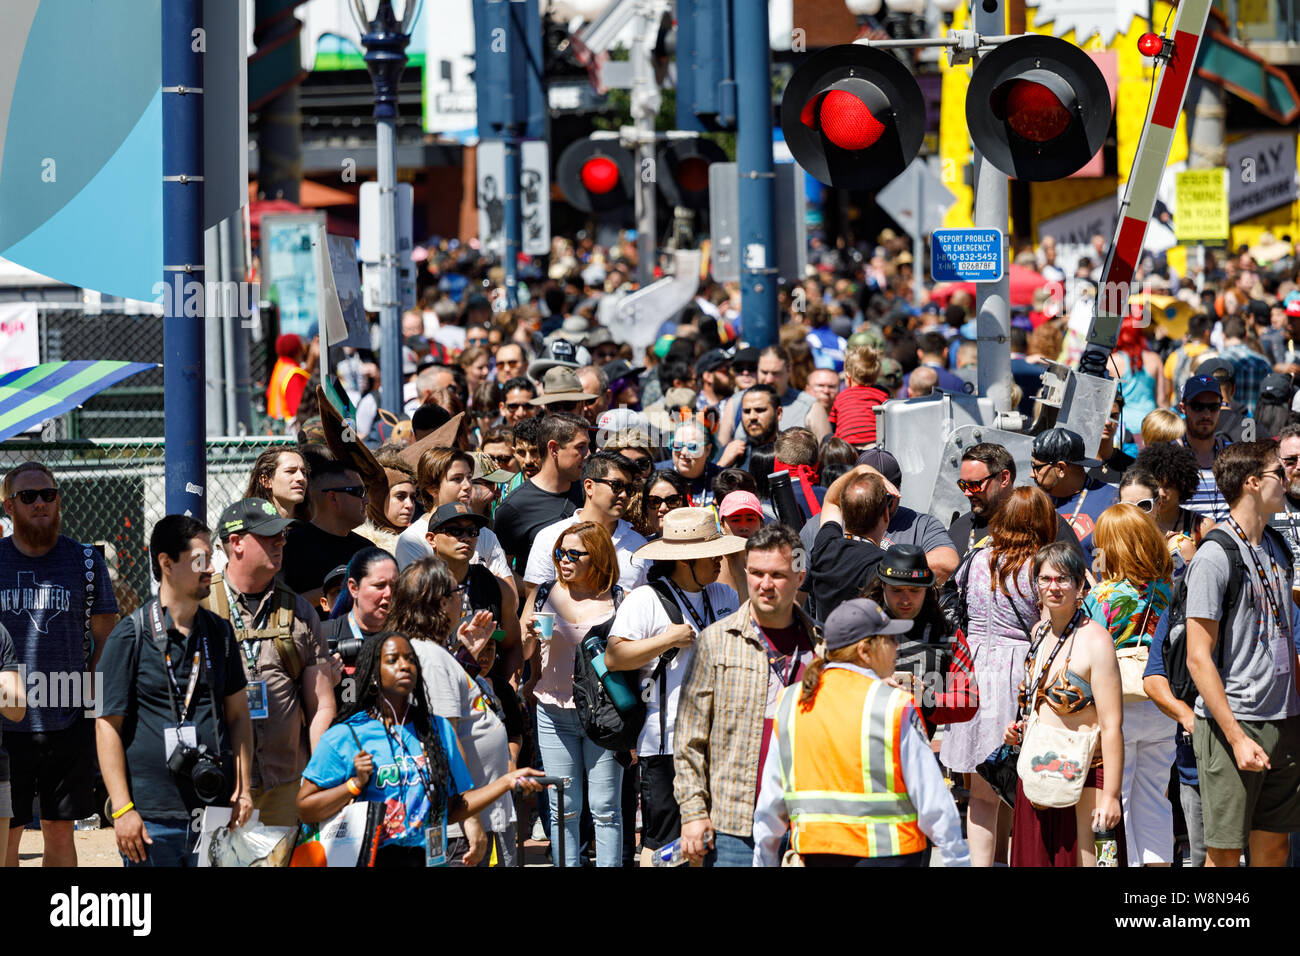 Crowd at Gaslamp Quarters during Comic Con 2019 Stock Photo